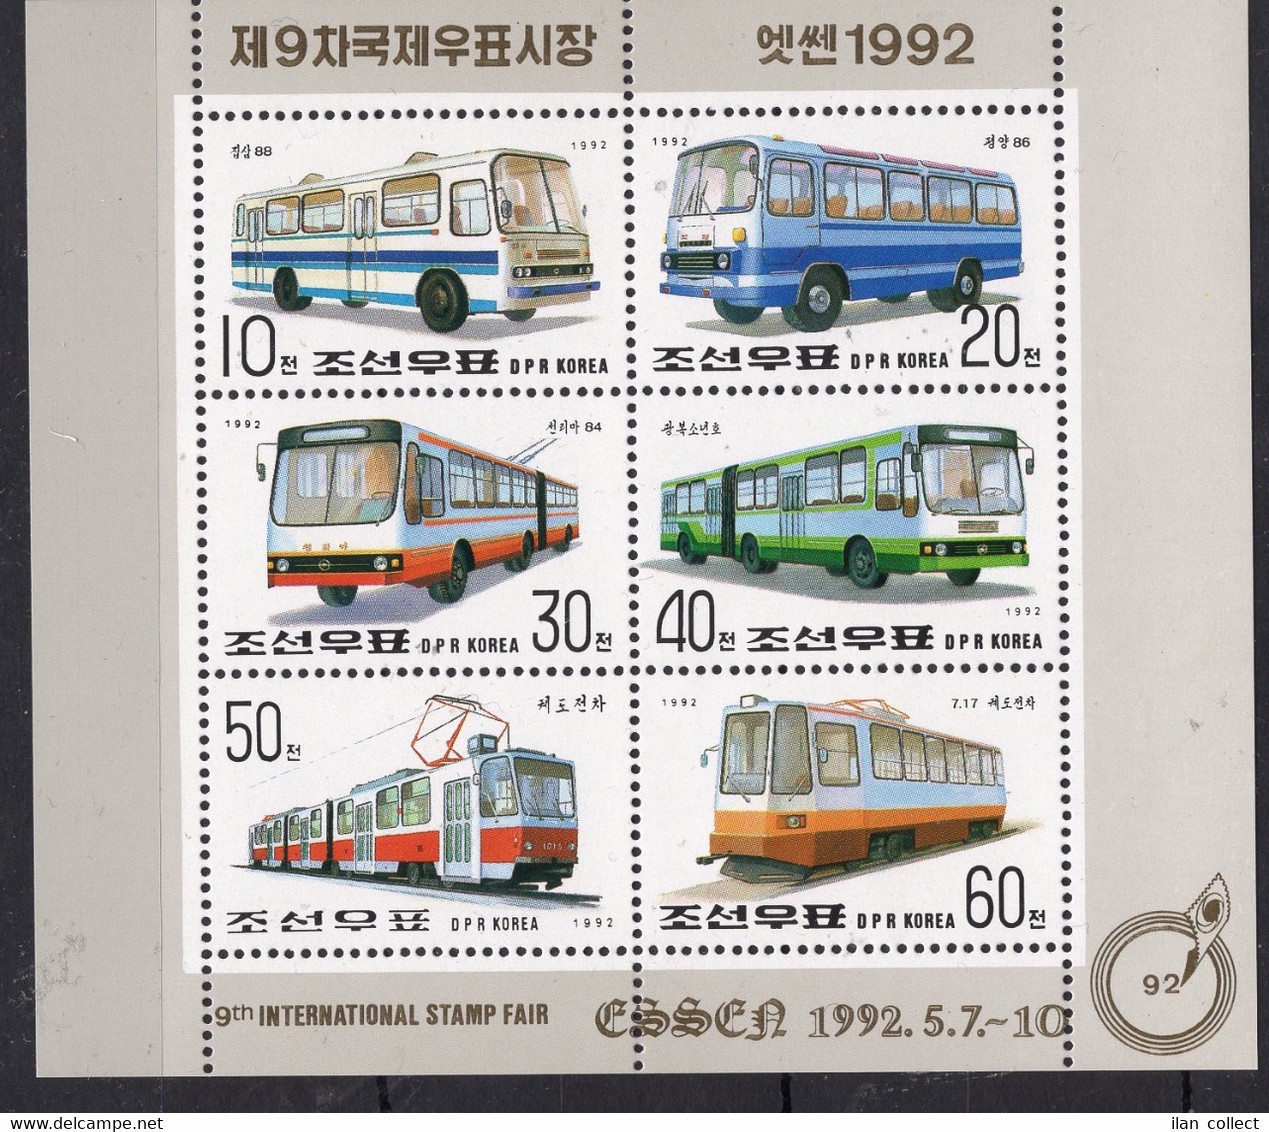 Transport / Busses On Stamps Perf. MNH** - RR1 - Bus